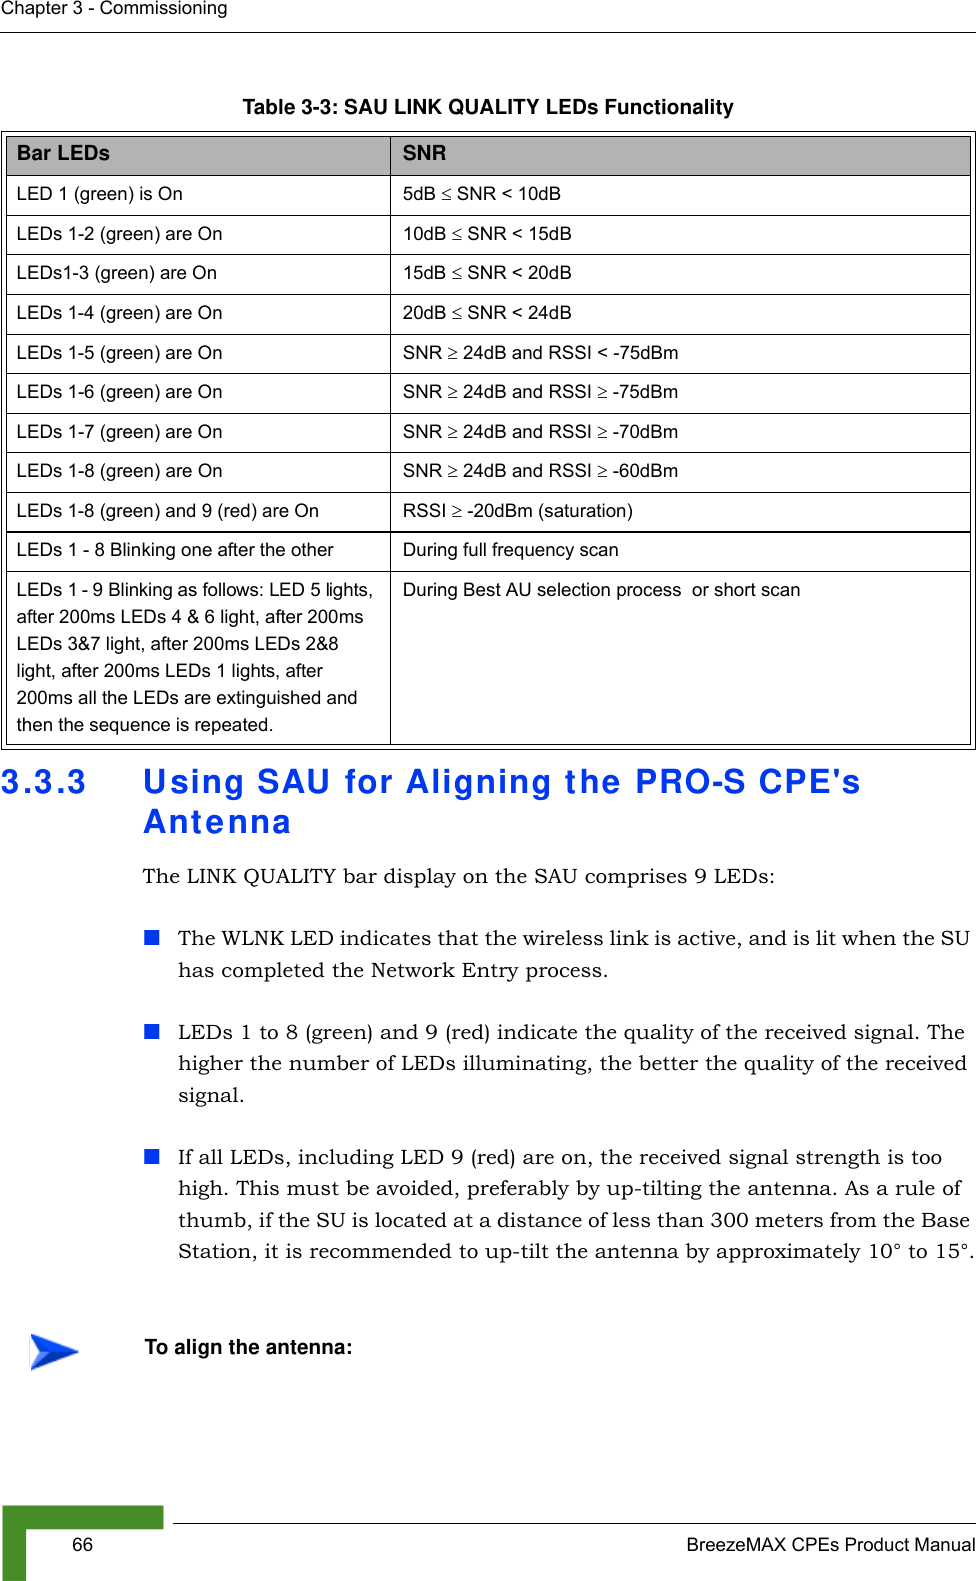 66 BreezeMAX CPEs Product ManualChapter 3 - Commissioning3.3.3 Using SAU for Aligning the PRO-S CPE&apos;s AntennaThe LINK QUALITY bar display on the SAU comprises 9 LEDs:The WLNK LED indicates that the wireless link is active, and is lit when the SU has completed the Network Entry process. LEDs 1 to 8 (green) and 9 (red) indicate the quality of the received signal. The higher the number of LEDs illuminating, the better the quality of the received signal.If all LEDs, including LED 9 (red) are on, the received signal strength is too high. This must be avoided, preferably by up-tilting the antenna. As a rule of thumb, if the SU is located at a distance of less than 300 meters from the Base Station, it is recommended to up-tilt the antenna by approximately 10° to 15°.Table 3-3: SAU LINK QUALITY LEDs FunctionalityBar LEDs SNRLED 1 (green) is On 5dB ≤ SNR &lt; 10dBLEDs 1-2 (green) are On 10dB ≤ SNR &lt; 15dBLEDs1-3 (green) are On 15dB ≤ SNR &lt; 20dBLEDs 1-4 (green) are On 20dB ≤ SNR &lt; 24dBLEDs 1-5 (green) are On SNR ≥ 24dB and RSSI &lt; -75dBmLEDs 1-6 (green) are On SNR ≥ 24dB and RSSI ≥ -75dBmLEDs 1-7 (green) are On SNR ≥ 24dB and RSSI ≥ -70dBm LEDs 1-8 (green) are On SNR ≥ 24dB and RSSI ≥ -60dBm LEDs 1-8 (green) and 9 (red) are On RSSI ≥ -20dBm (saturation)LEDs 1 - 8 Blinking one after the other During full frequency scanLEDs 1 - 9 Blinking as follows: LED 5 lights, after 200ms LEDs 4 &amp; 6 light, after 200ms LEDs 3&amp;7 light, after 200ms LEDs 2&amp;8 light, after 200ms LEDs 1 lights, after 200ms all the LEDs are extinguished and then the sequence is repeated. During Best AU selection process  or short scanTo align the antenna: